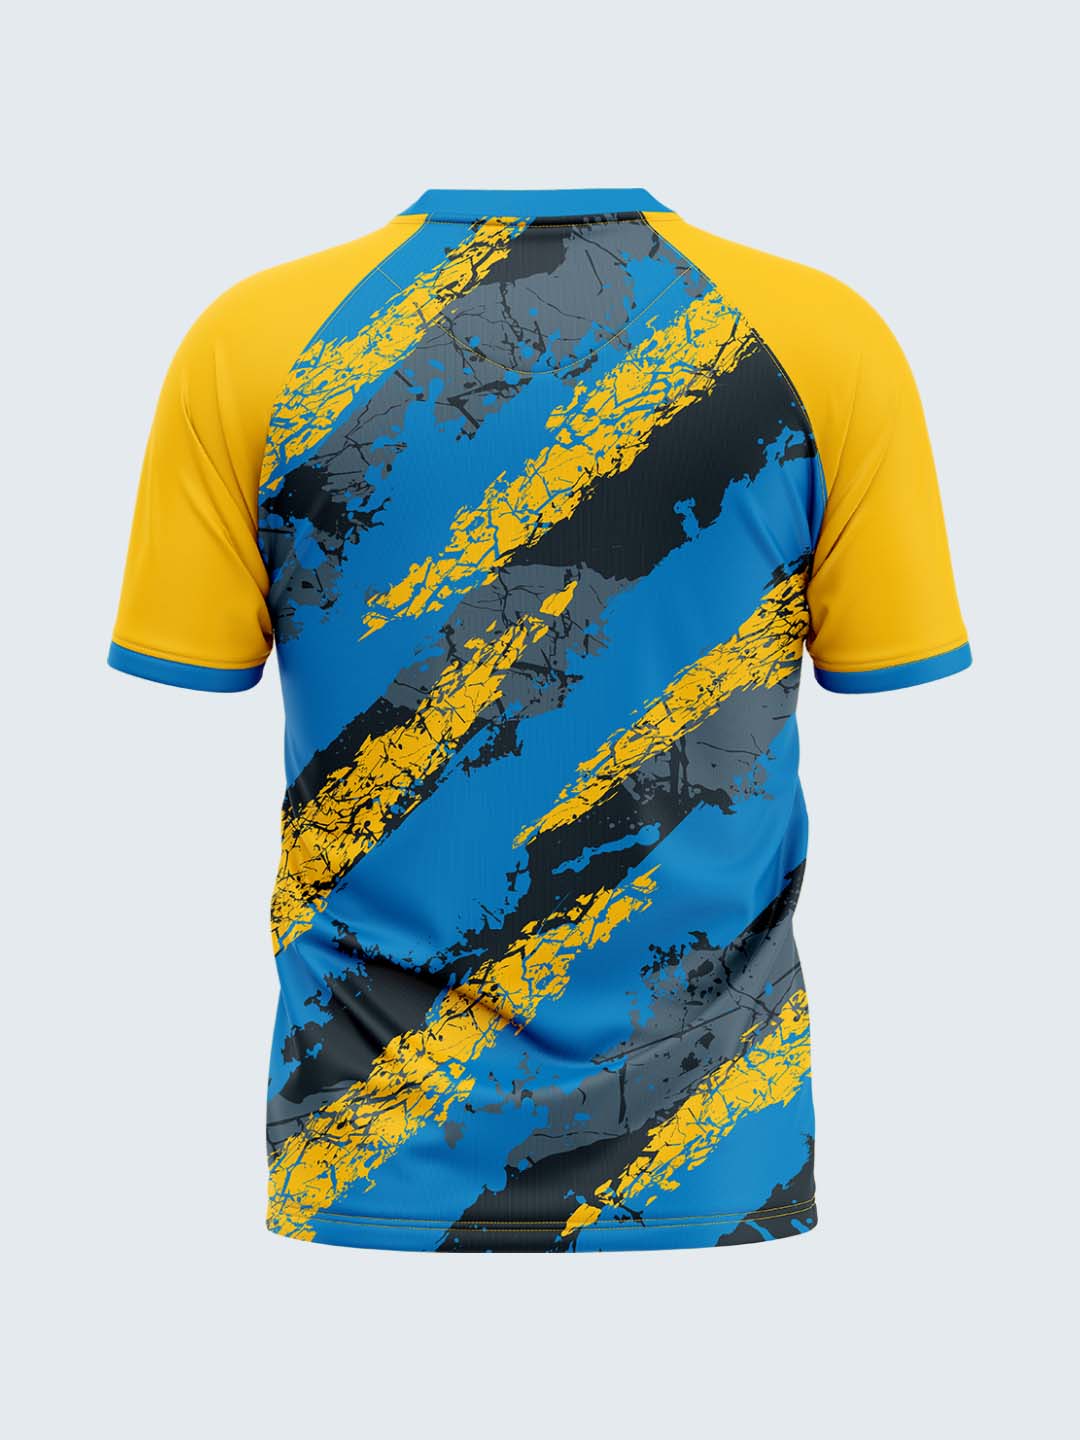 Customise Yellow Rugby Jersey - 2076YW - Front